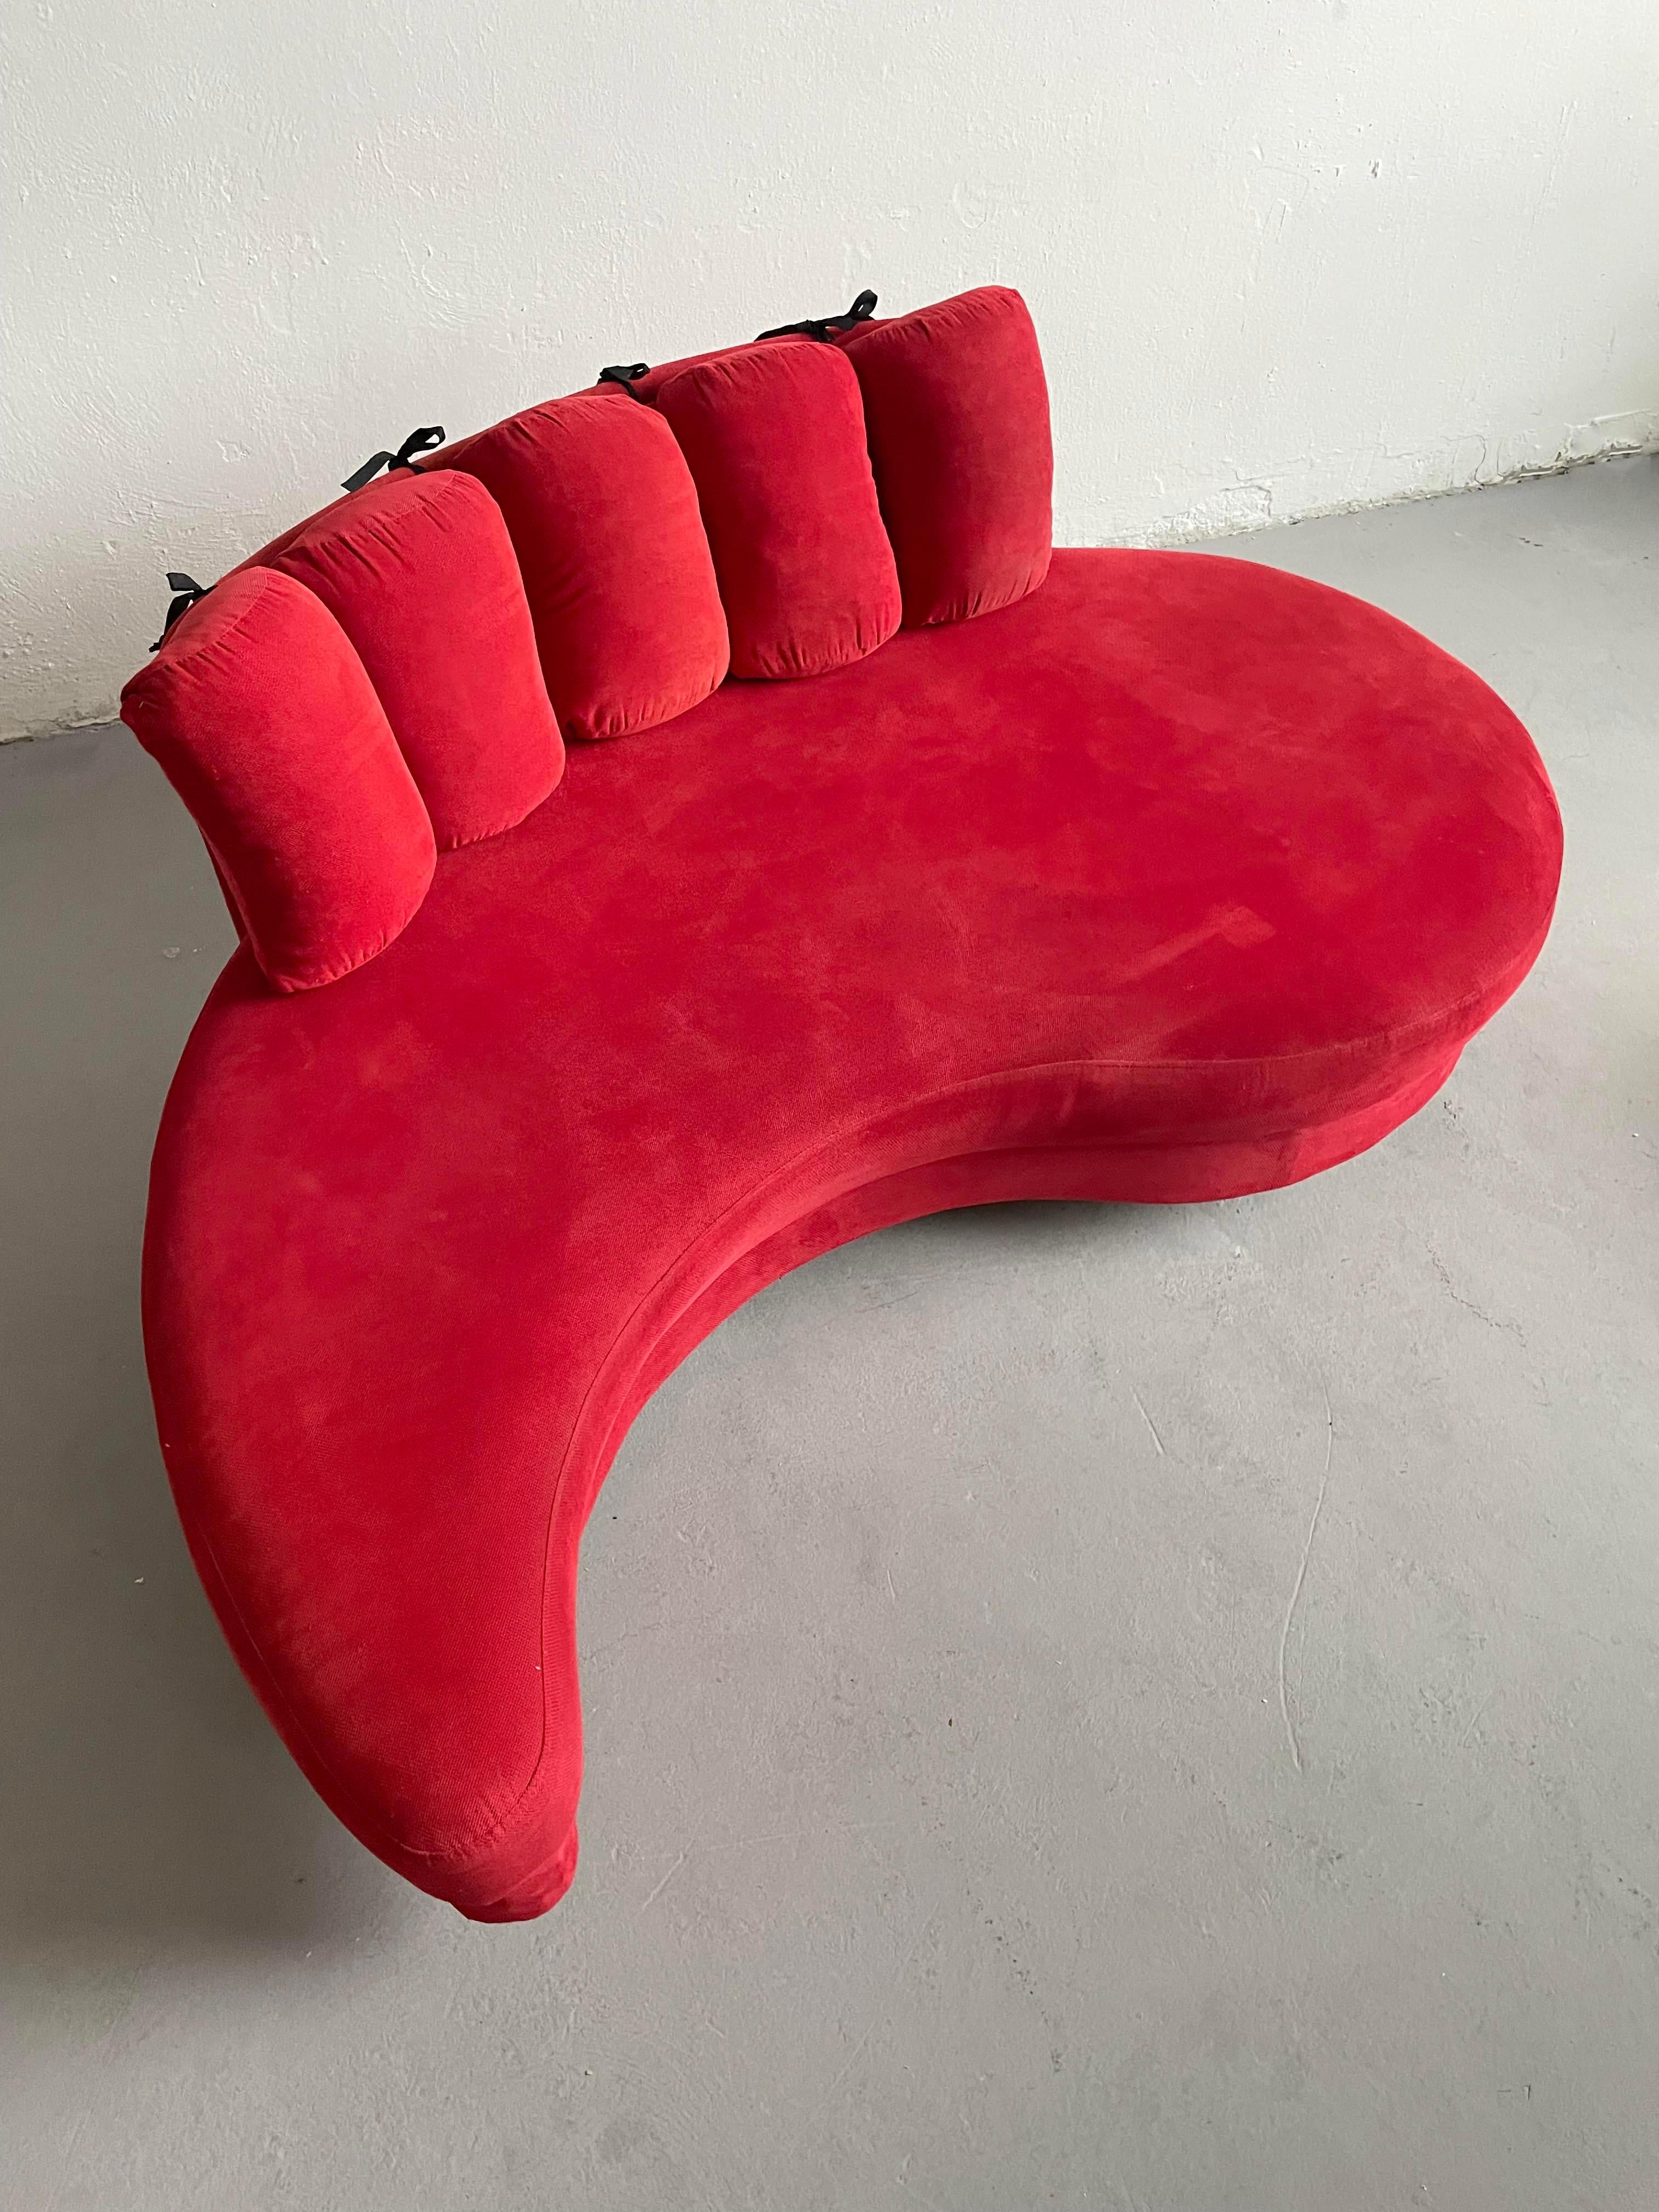 Set of 2 Postmodern Curved Yin-Yang Shaped Sofa Daybeds in Red Fabric, c 1980s For Sale 3